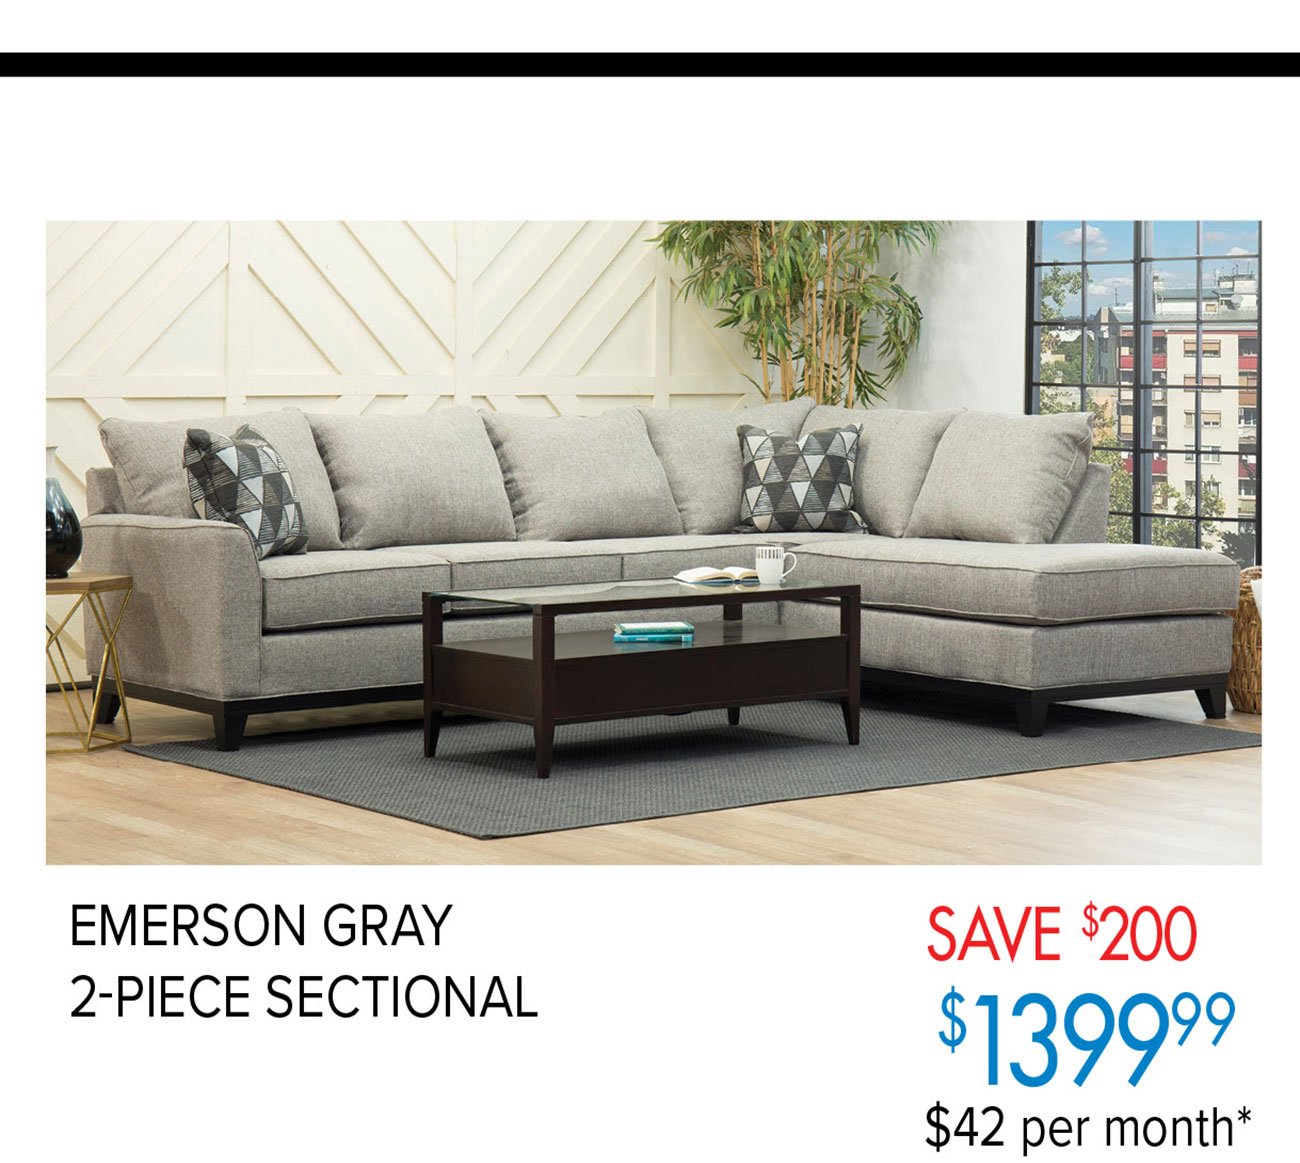  EMERSON GRAY 2-PIECE SECTIONAL $-39999 $42 per month* 